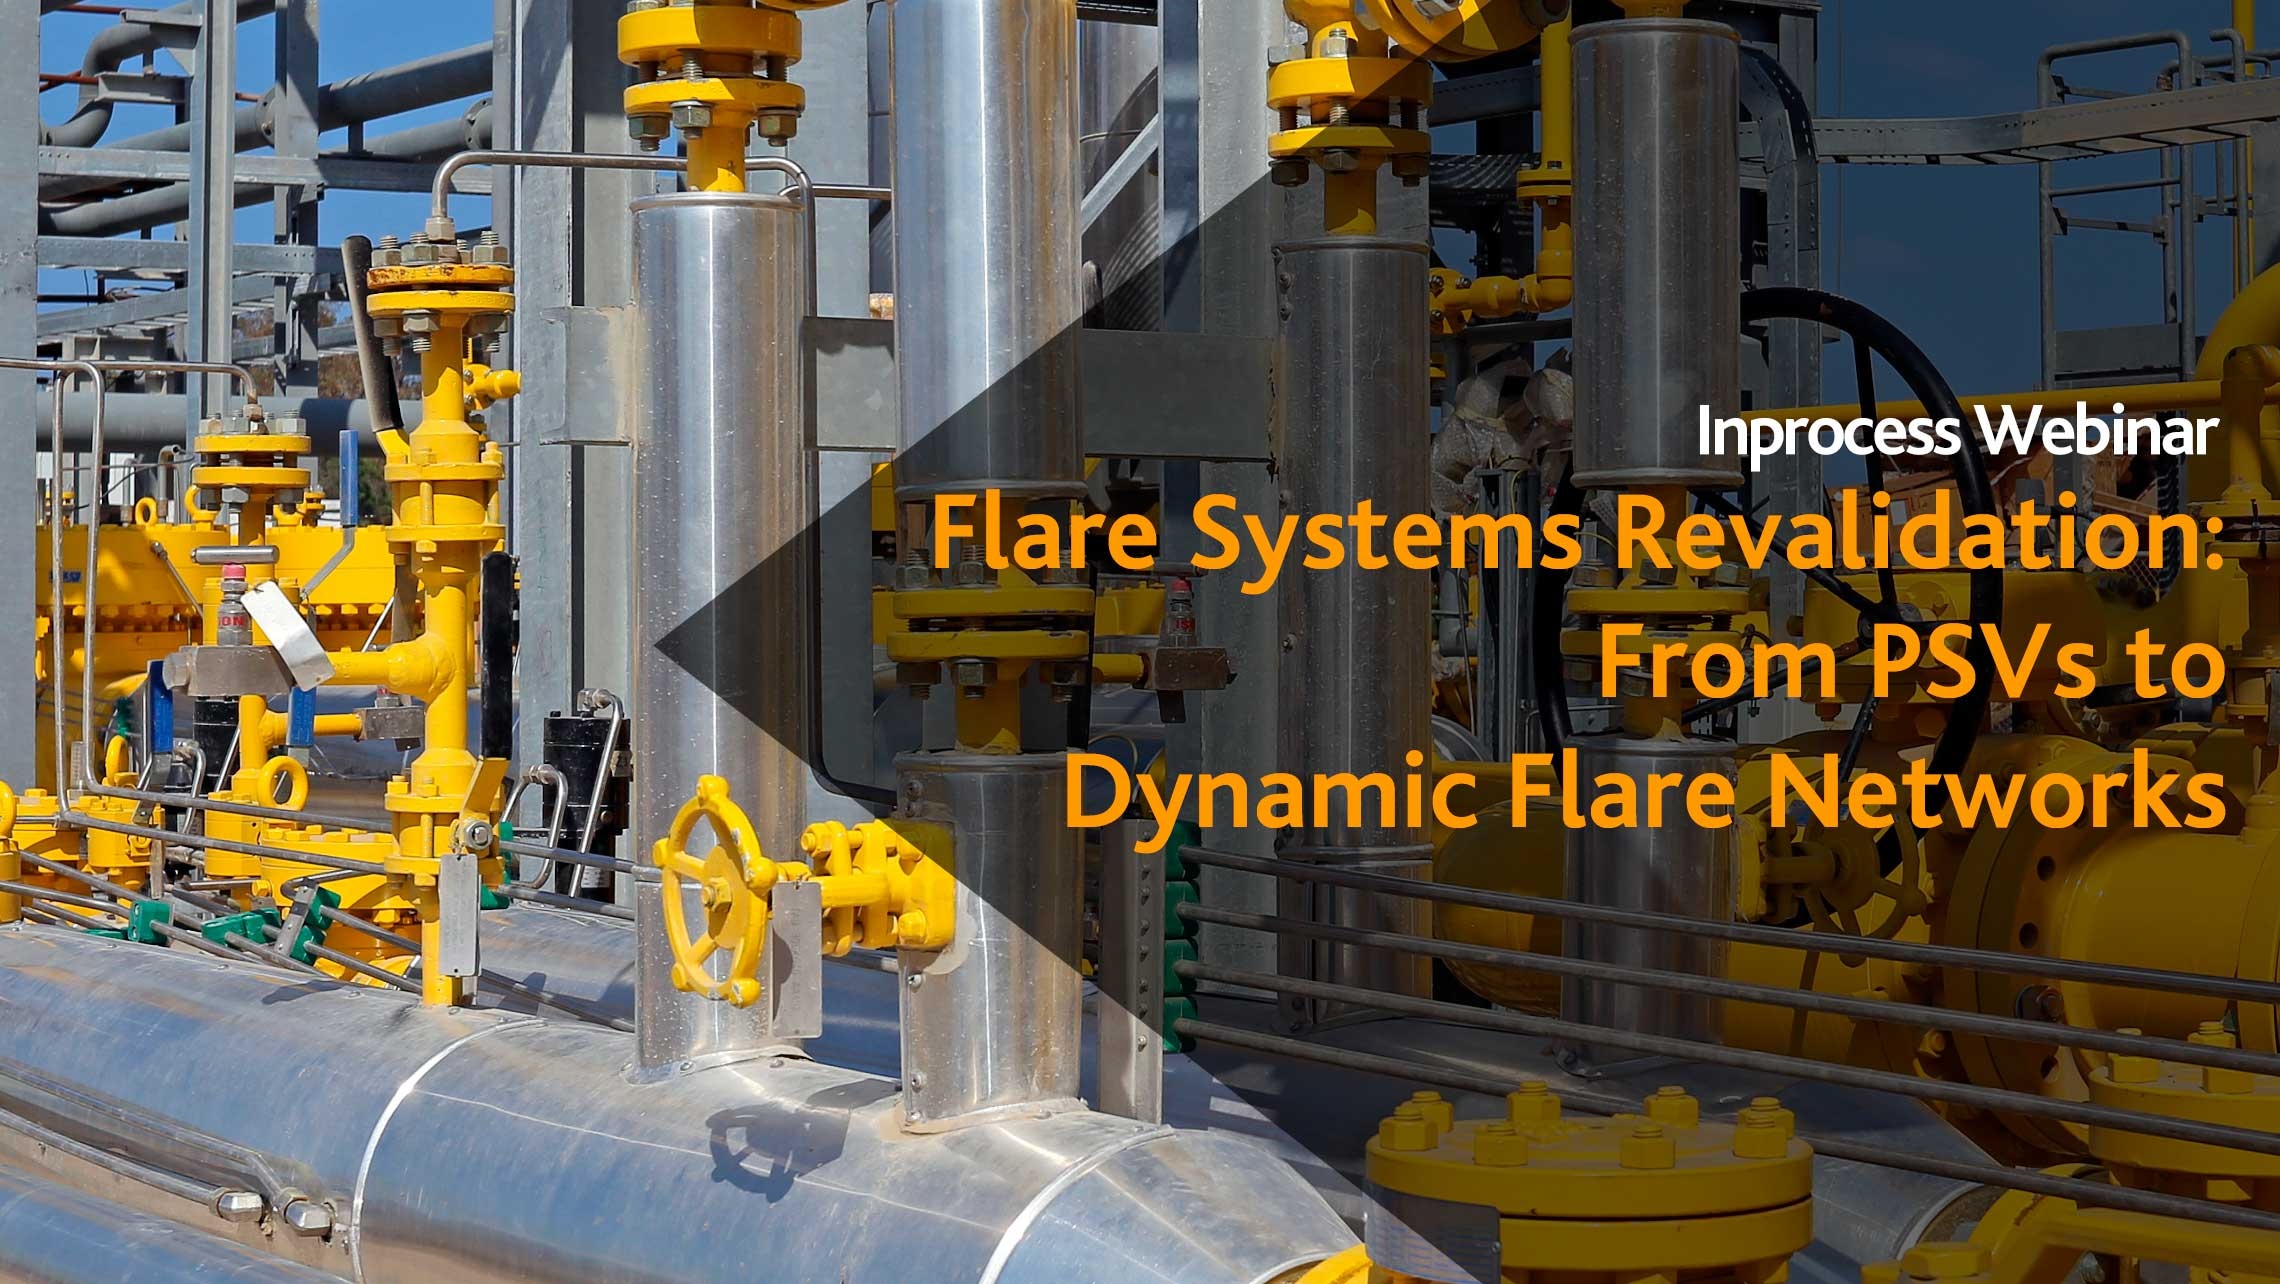 Inprocess´ Webinars: “Flare Systems Revalidation: From PSVs to Dynamic Flare Networks”